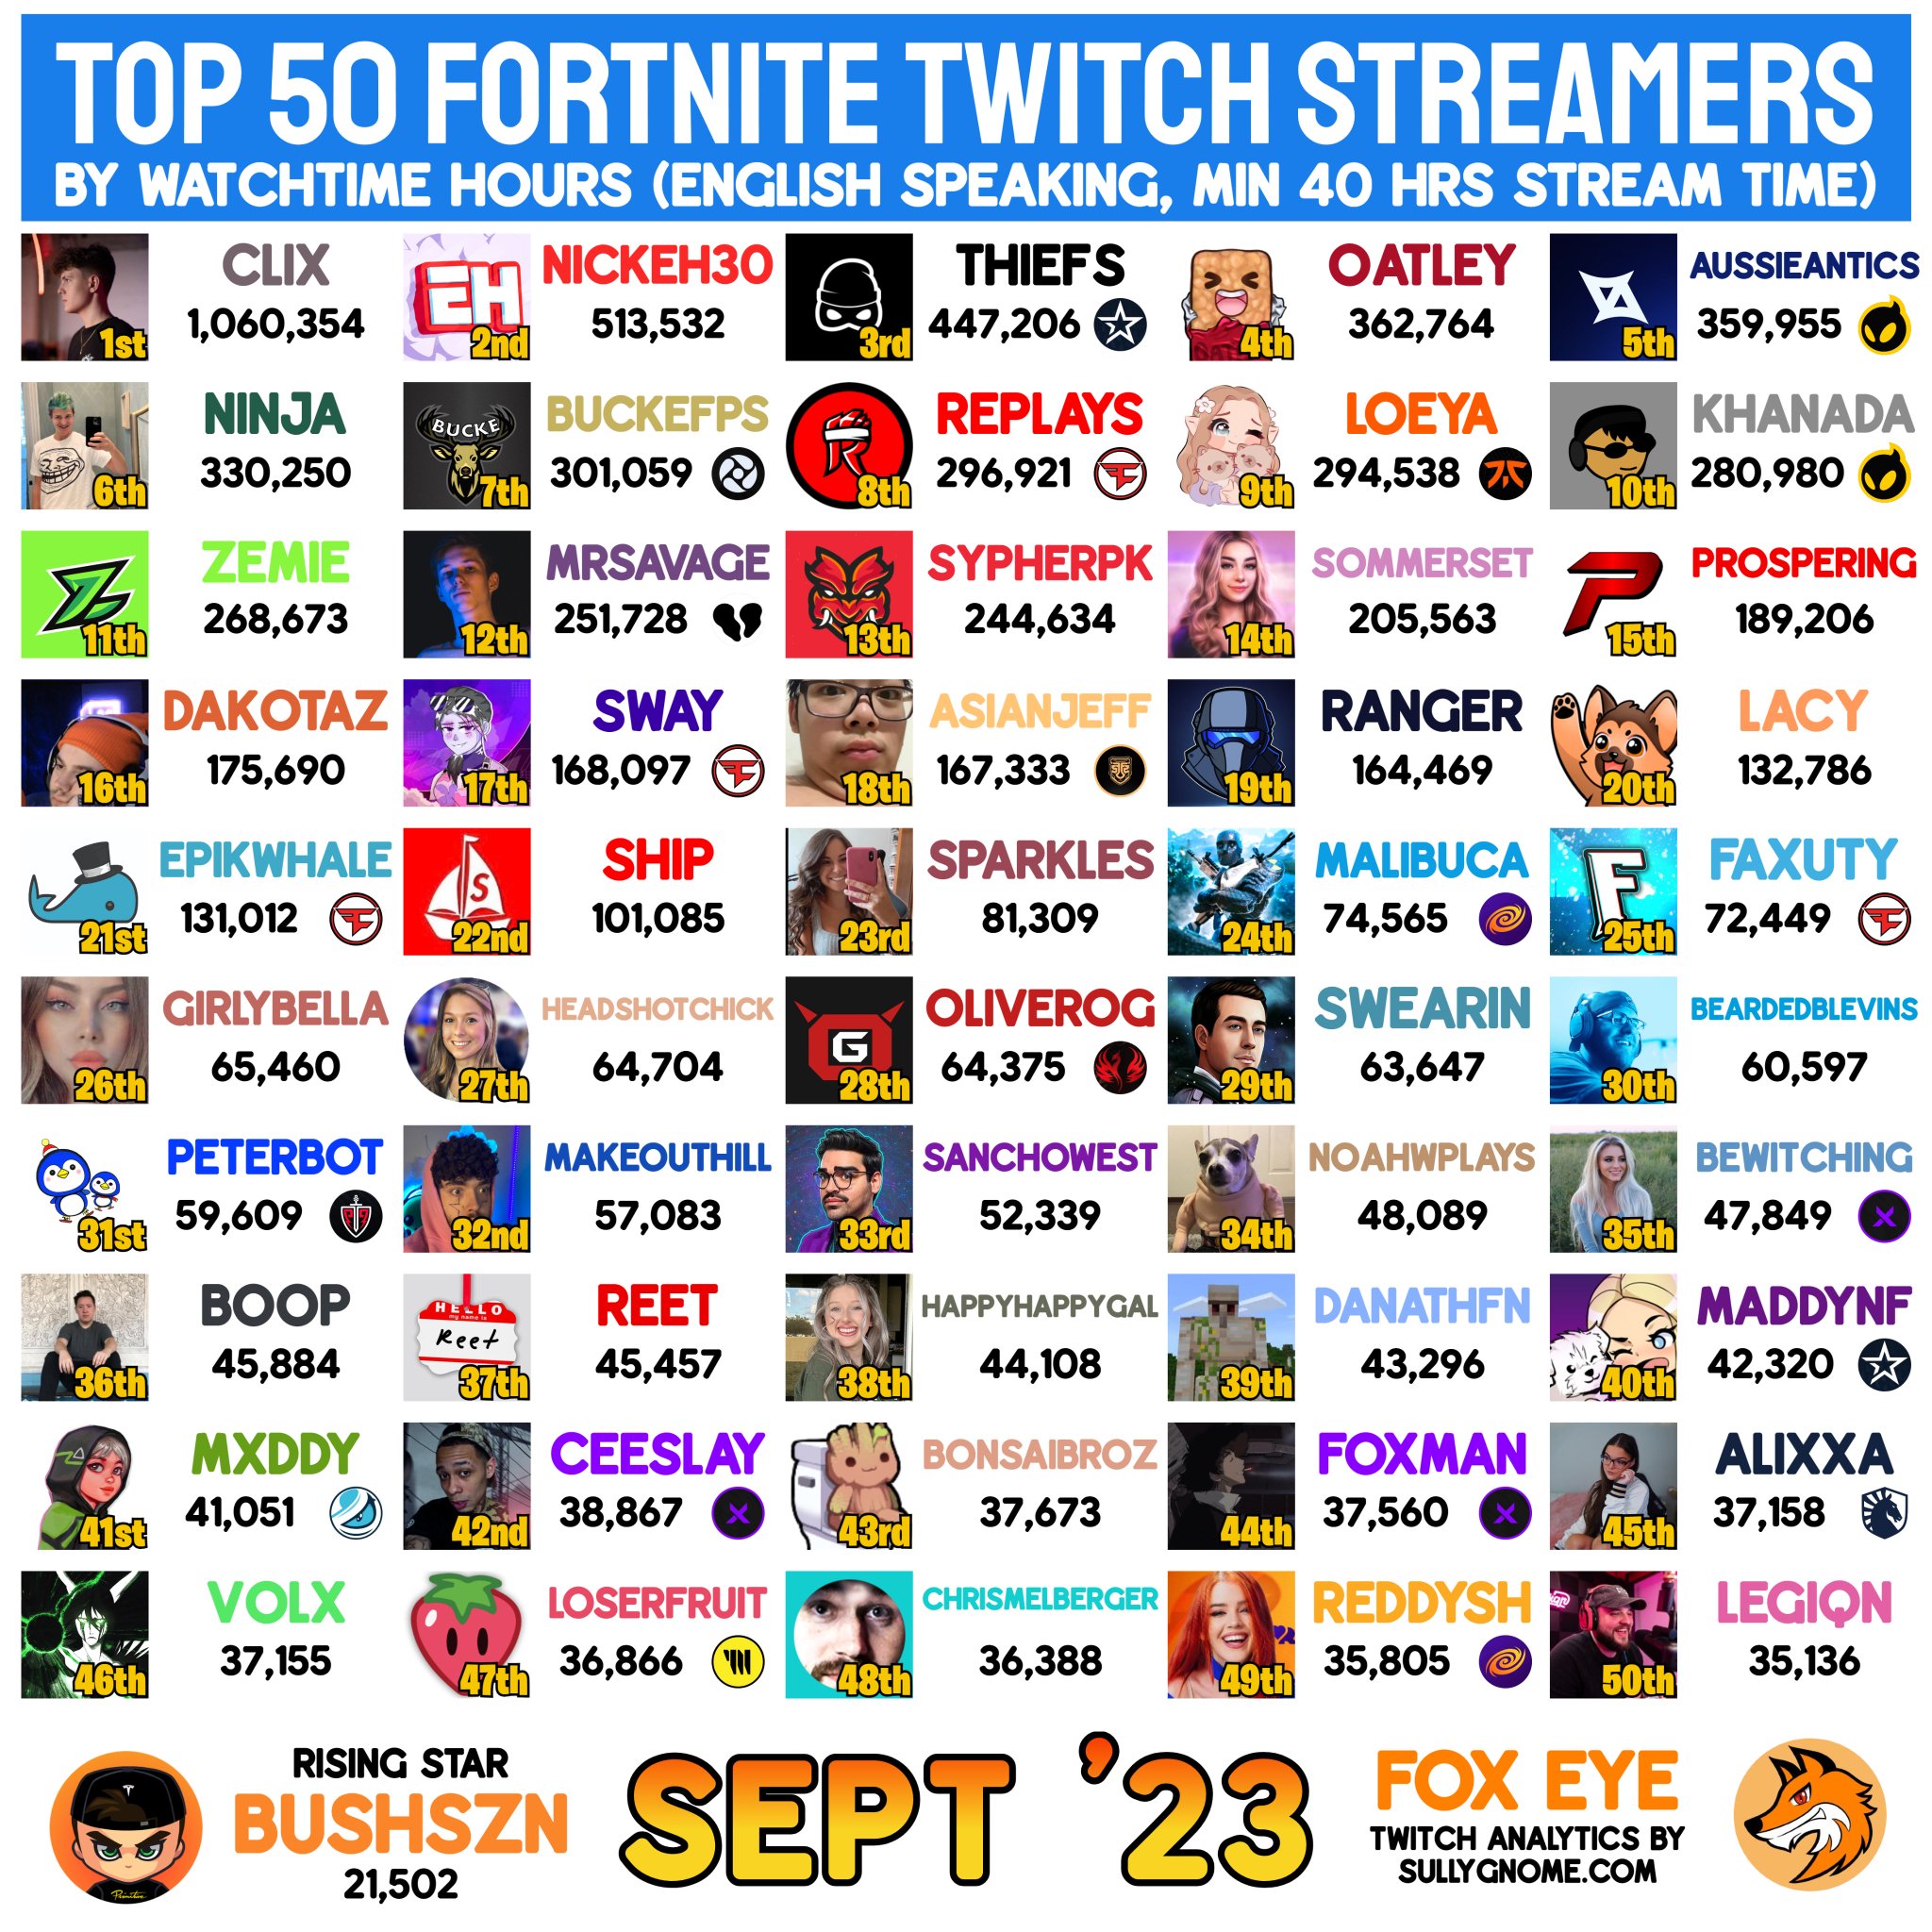 Top 50 Fortnite Twitch Streamers by Average Viewers of October